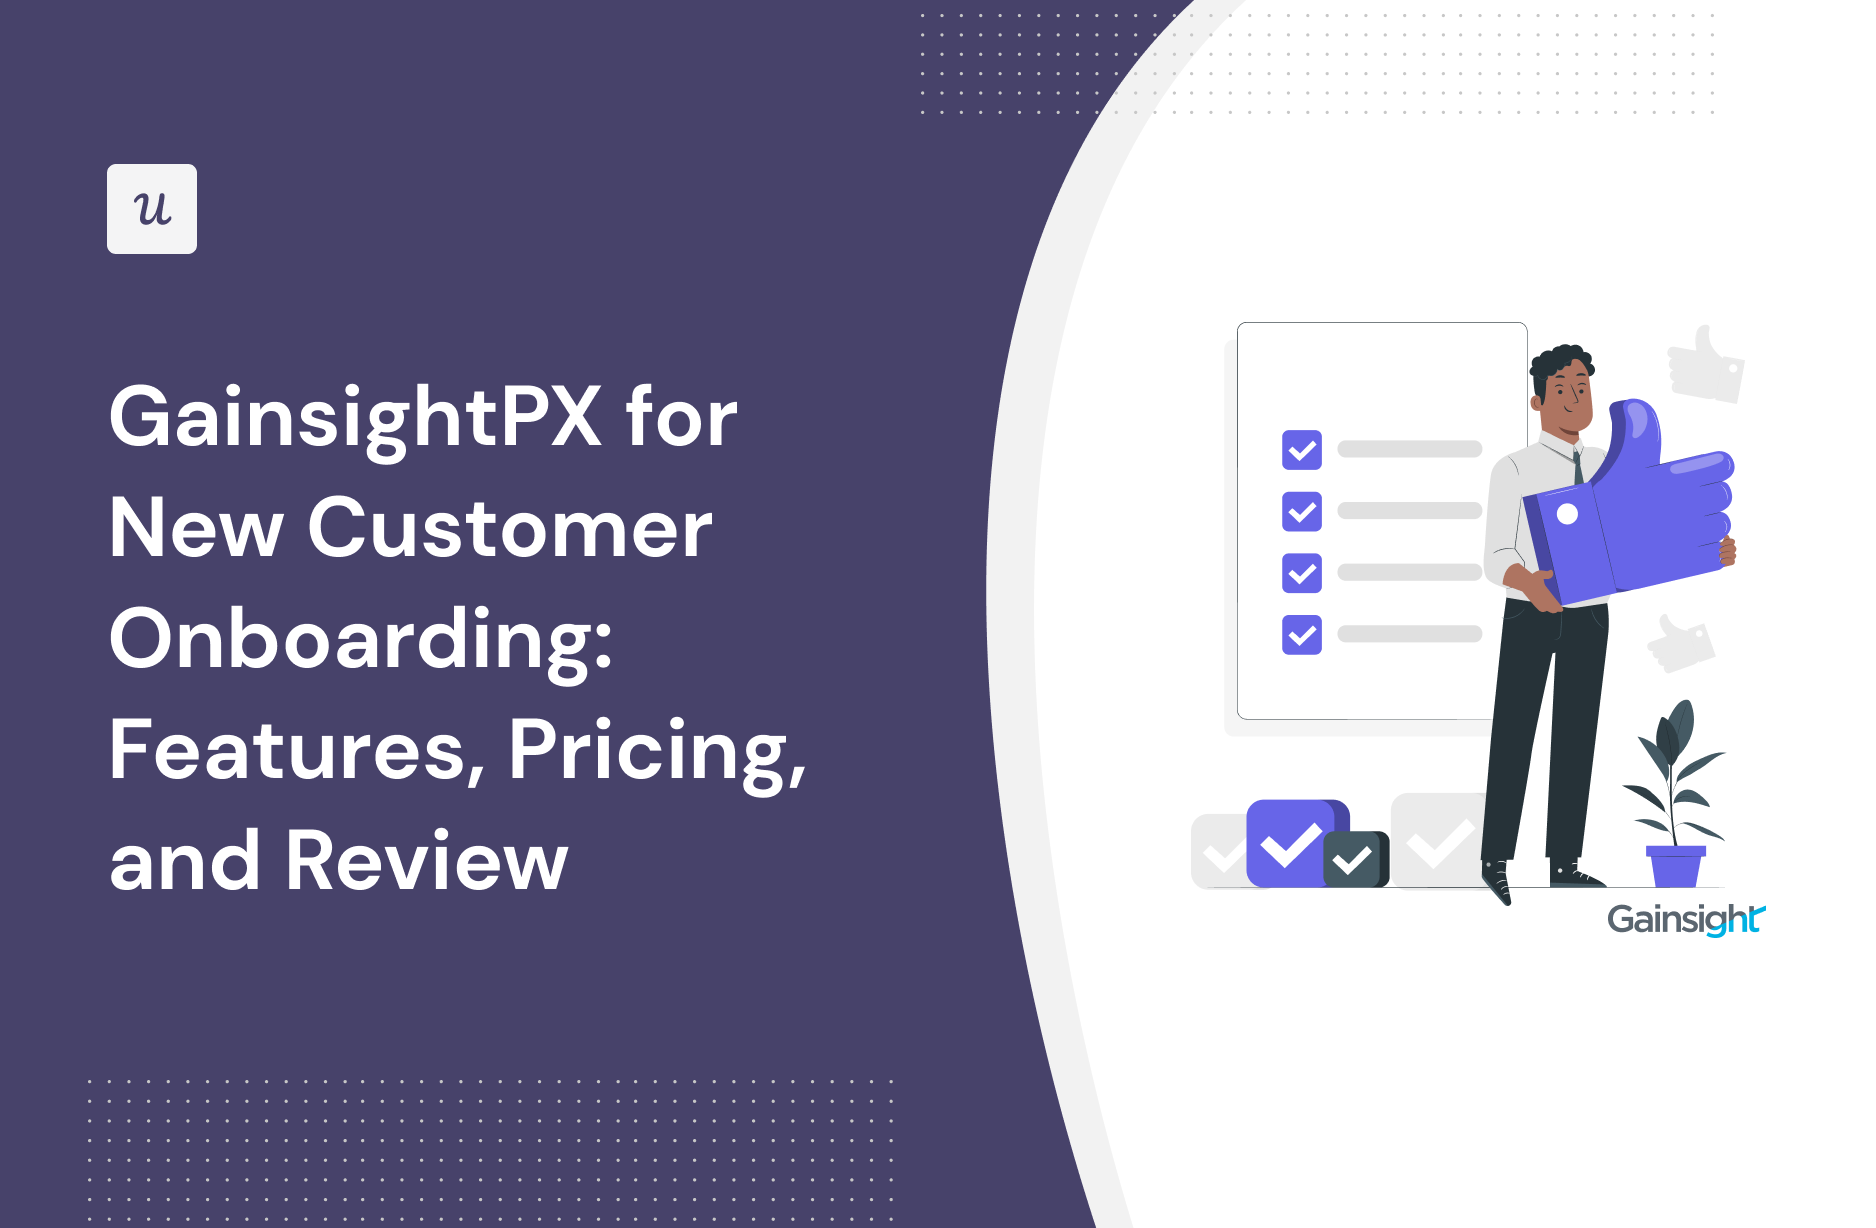 GainsightPX for New Customer Onboarding: Features, Pricing, and Review